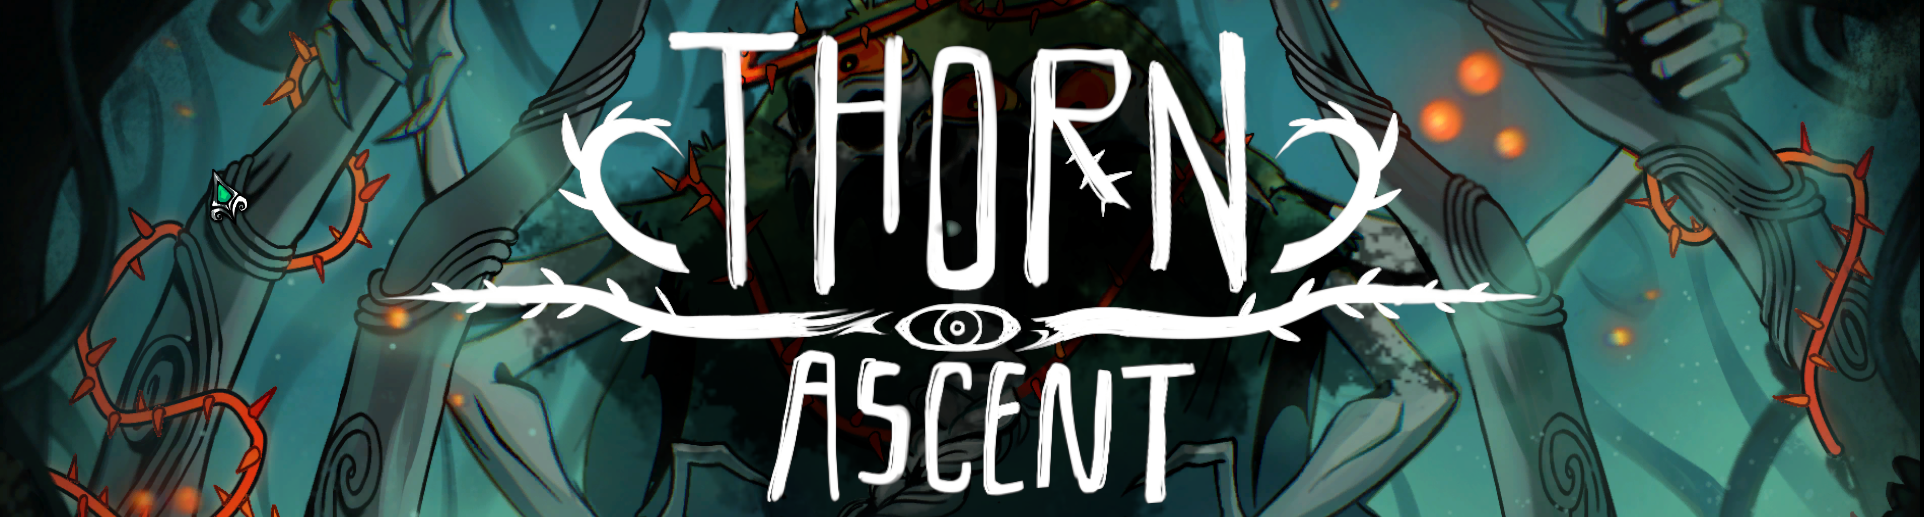 Thorn Ascent